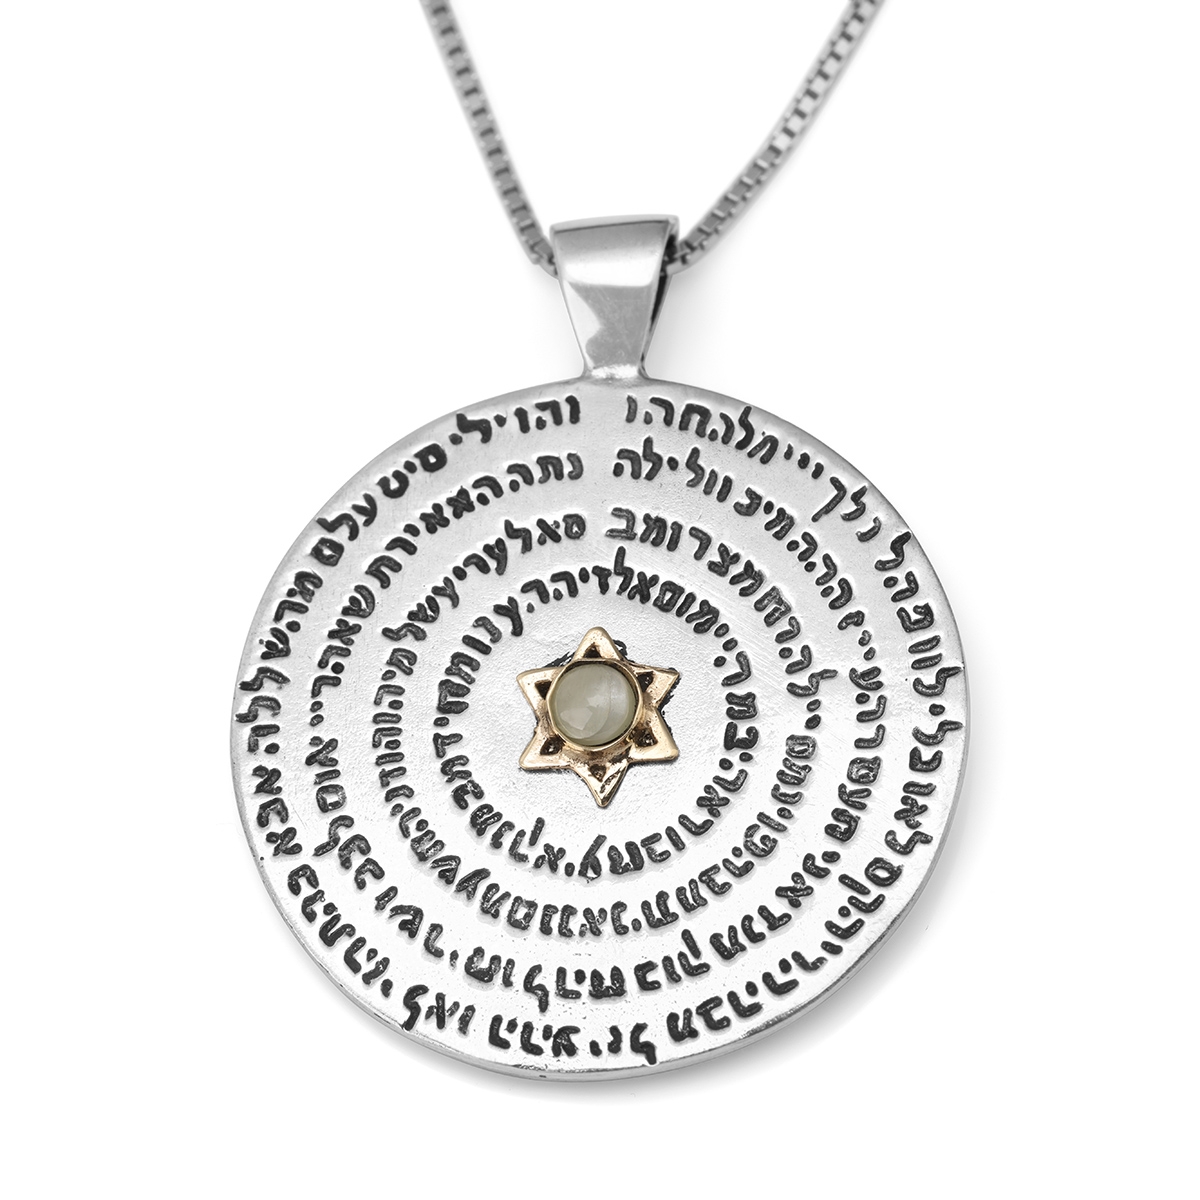 Silver and Gold Disk Kabbalah Necklace with Chrysoberyl - 72 Holy Names - 1